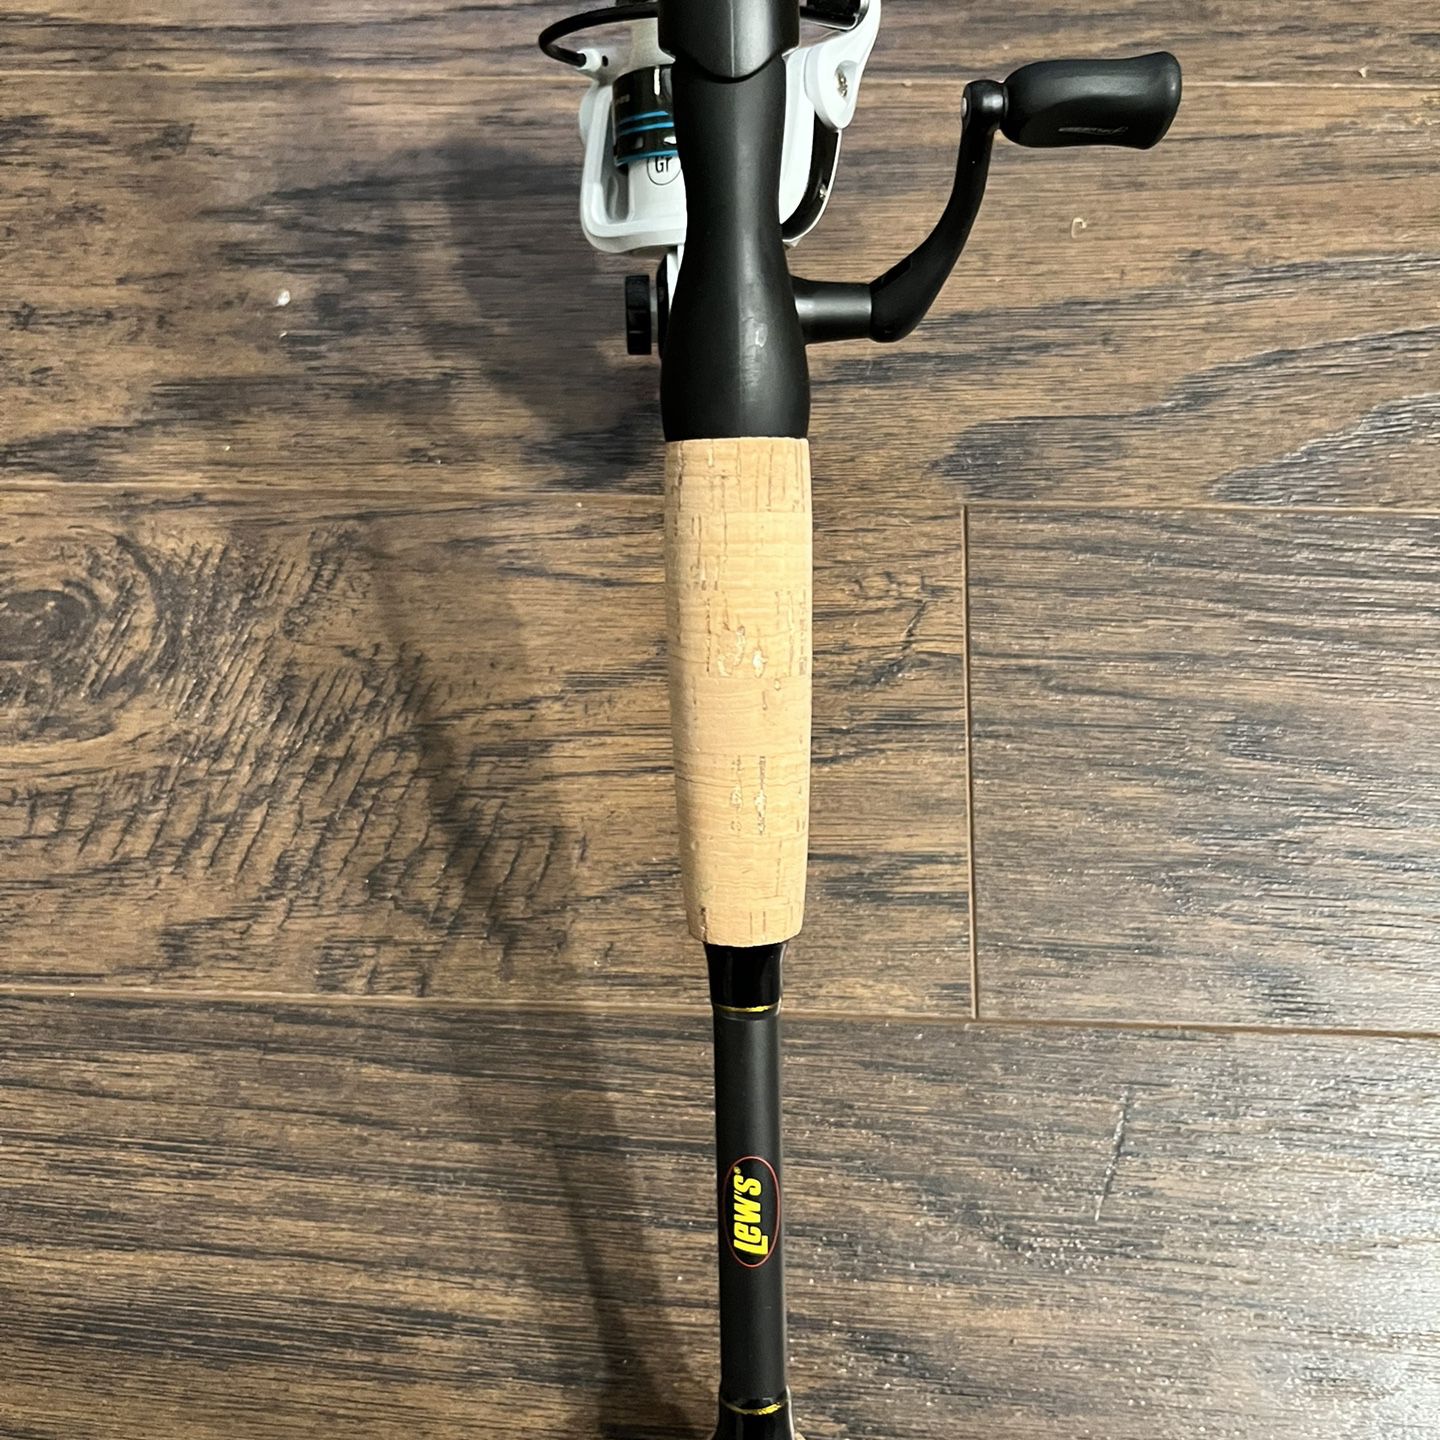 Lews Fishing Rod And Reel Spinning Caster for Sale in Roanoke, TX - OfferUp